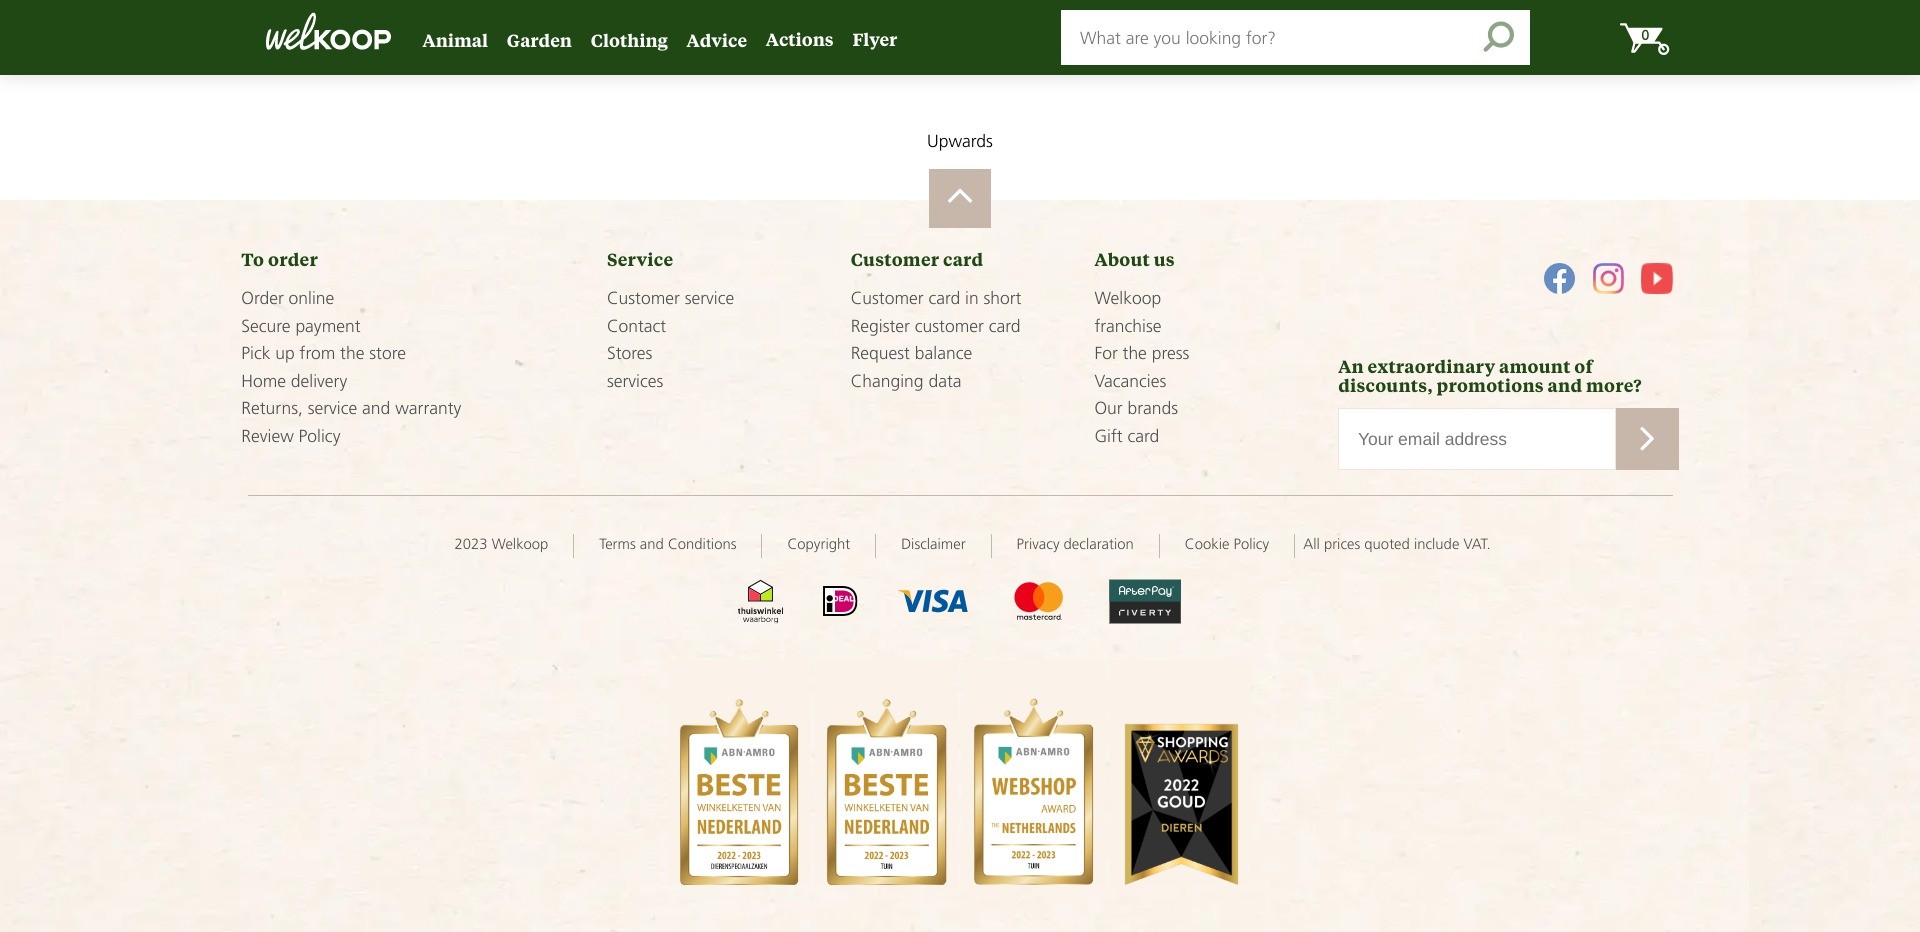 Screenshot of the bottom of the homepage of welkoop.nl, displaying its Shopping Awards badges